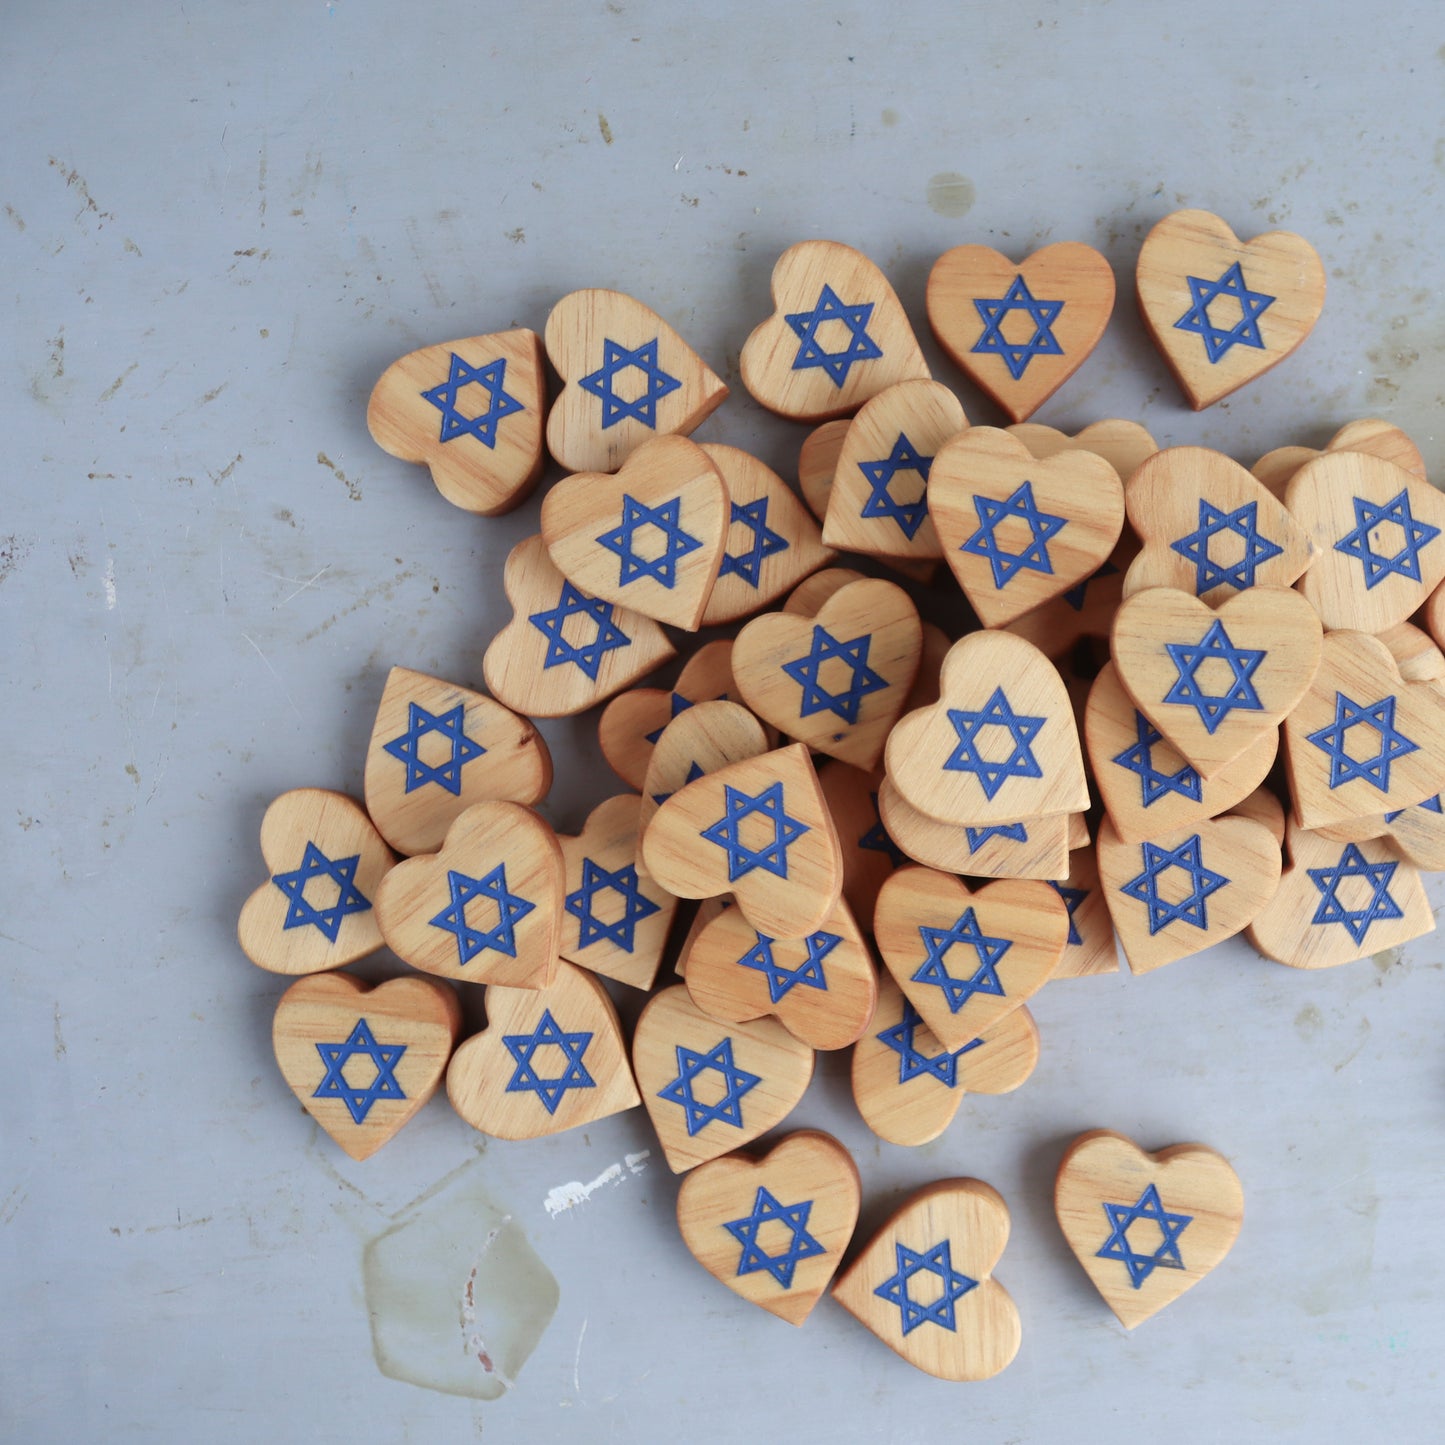 Hearts for Peace in Israel